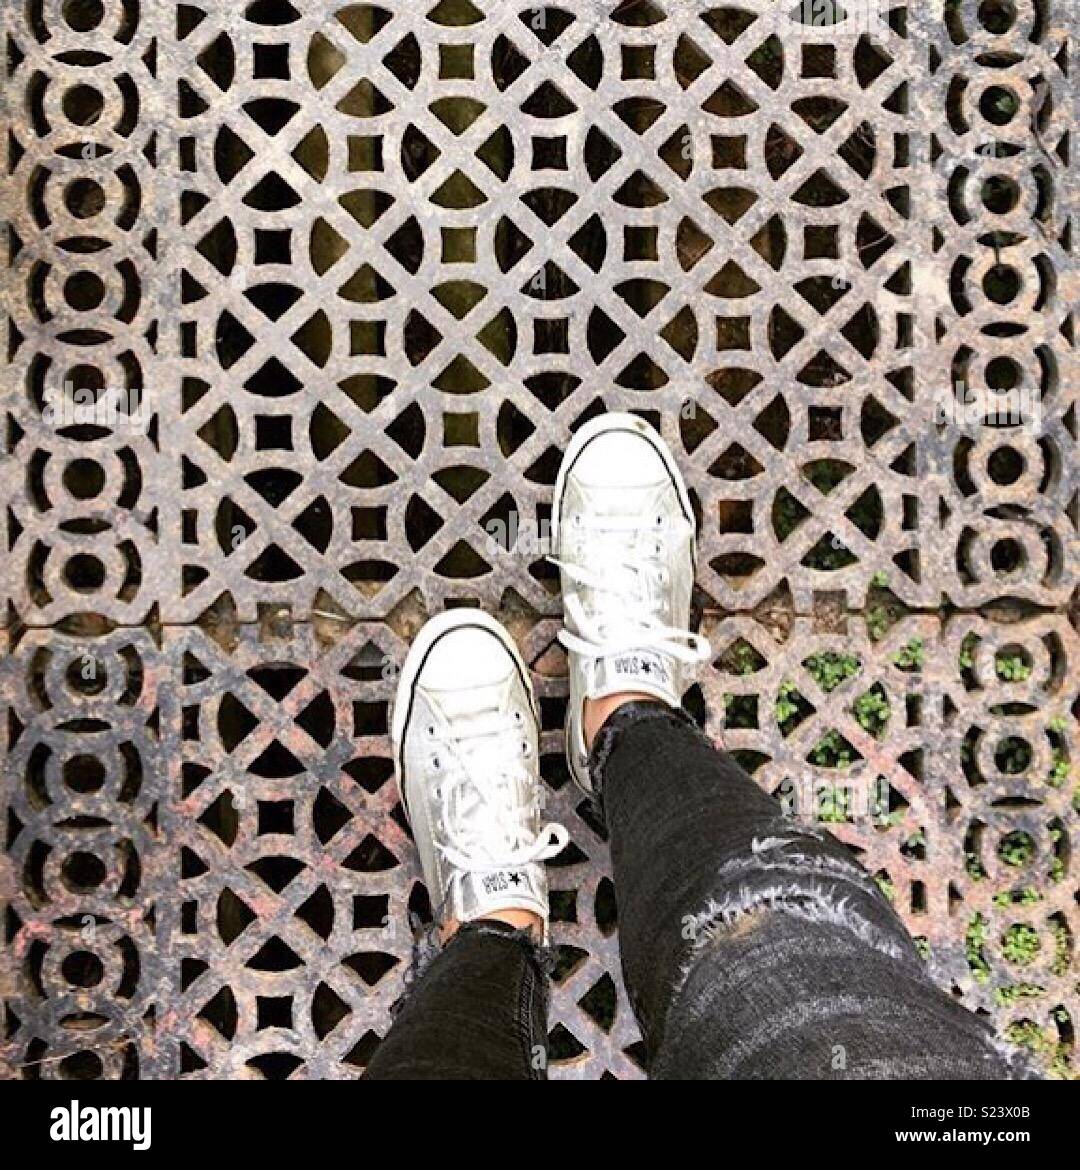 Feet standing on pretty grate Stock Photo